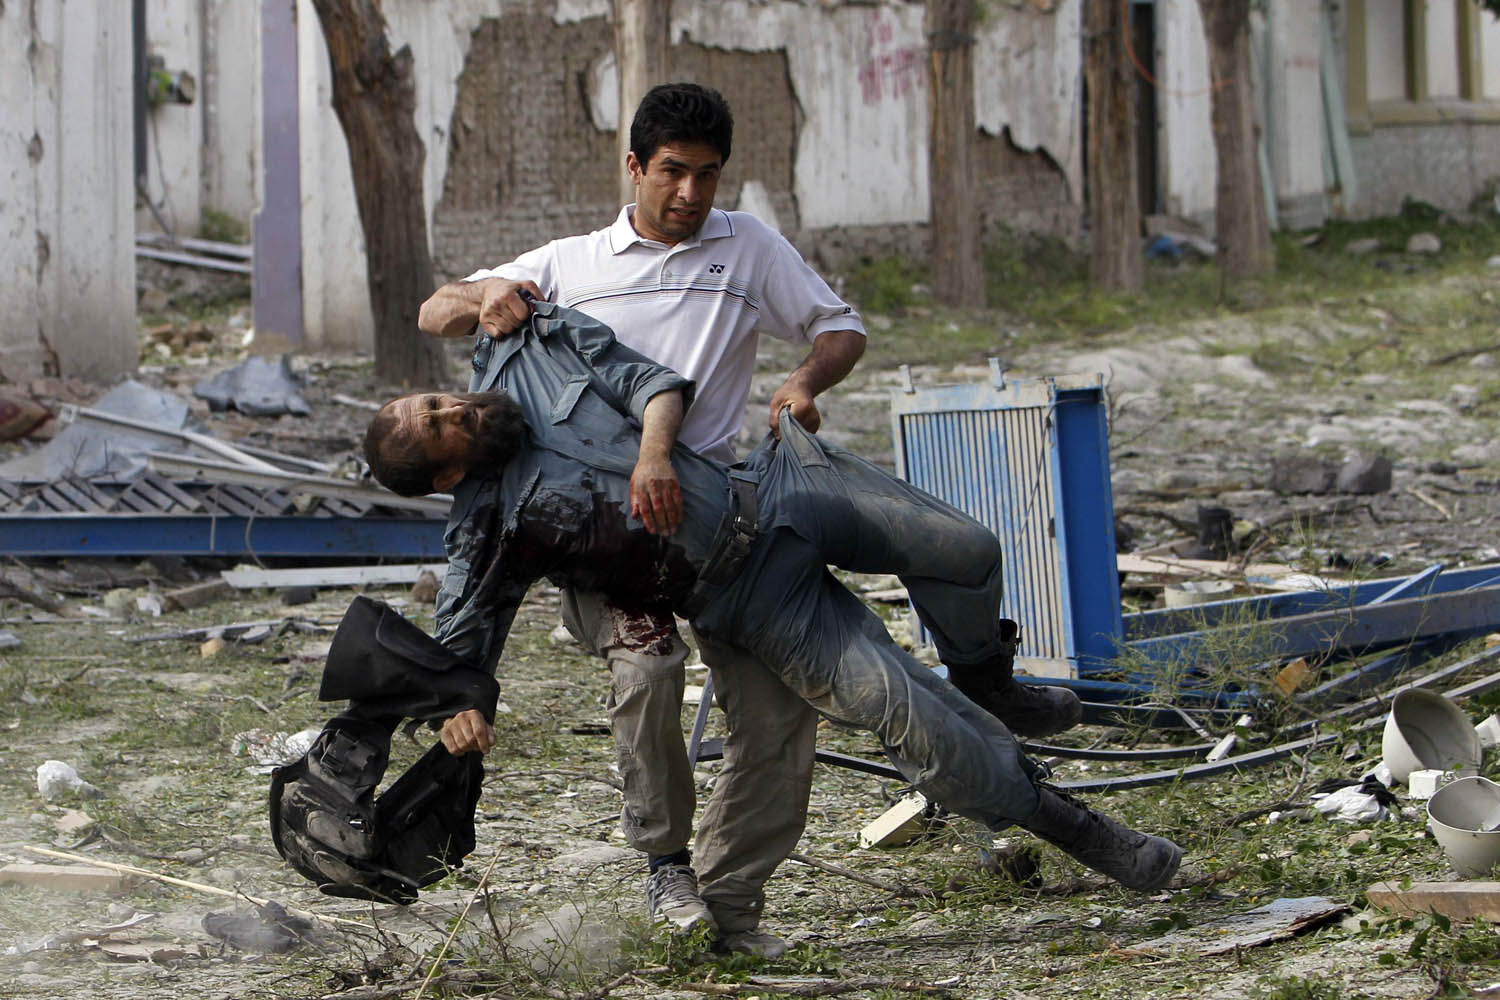 May 24, 2013. A wounded Afghan policeman is carried away from the site of an explosion in Kabul.